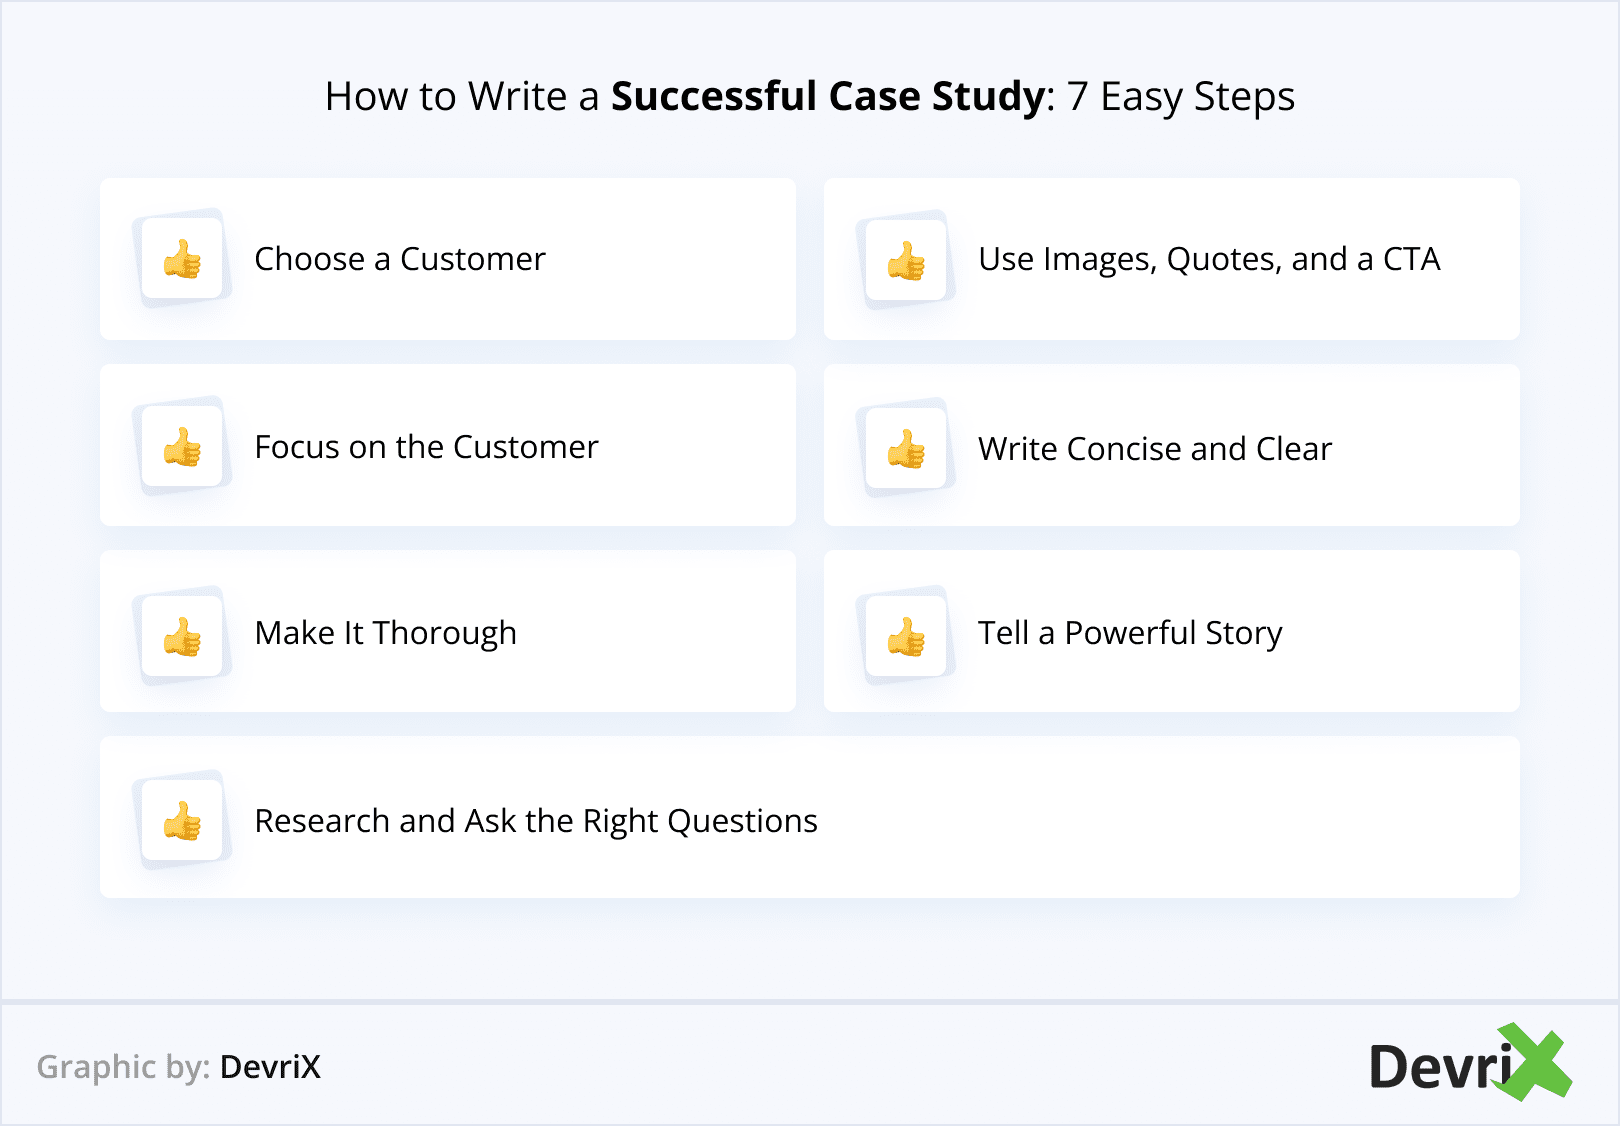 How to Write a Successful Case Study_ 7 Easy Steps